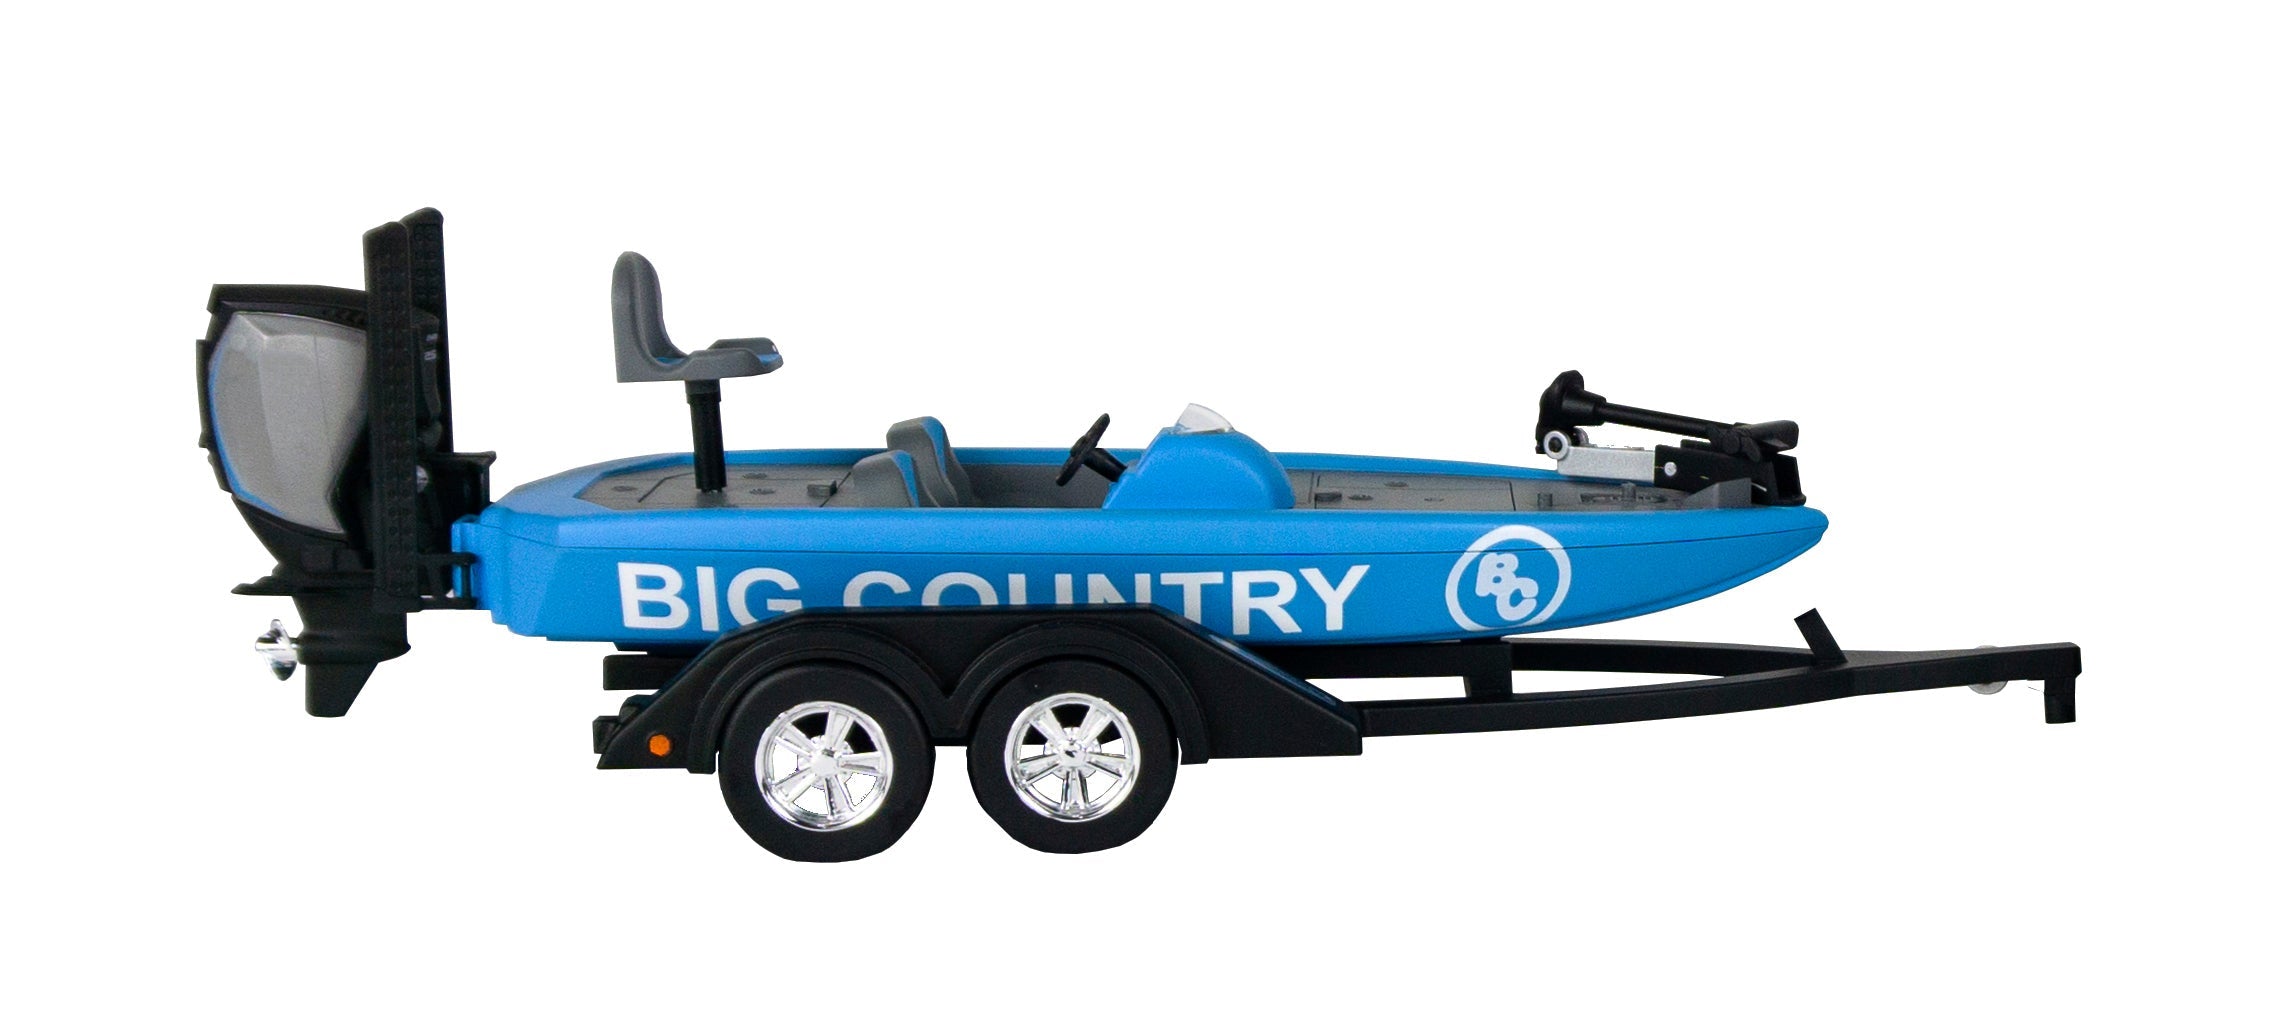  Big Country Toys - Fishing Toy Playset - Kids Fishing Set with Toy  Boat - 10-Piece Fishing Set : Toys & Games